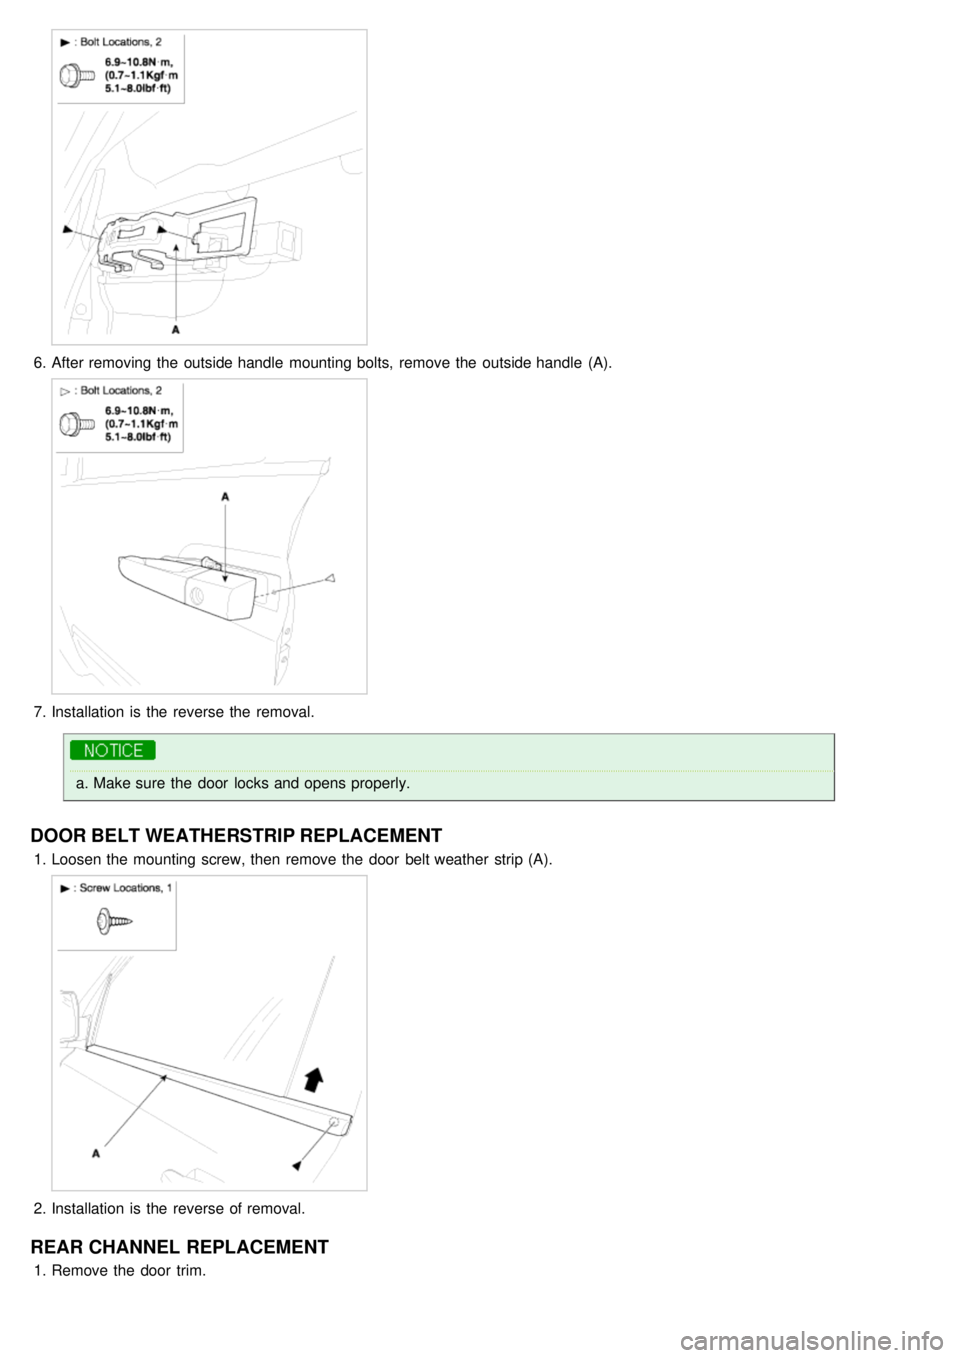 KIA CARNIVAL 2007  Workshop Manual 6.After removing the  outside handle  mounting bolts,  remove the  outside handle  (A).
7.Installation  is the  reverse the  removal.
a.Make sure  the  door  locks and opens properly.
DOOR BELT WEATHE